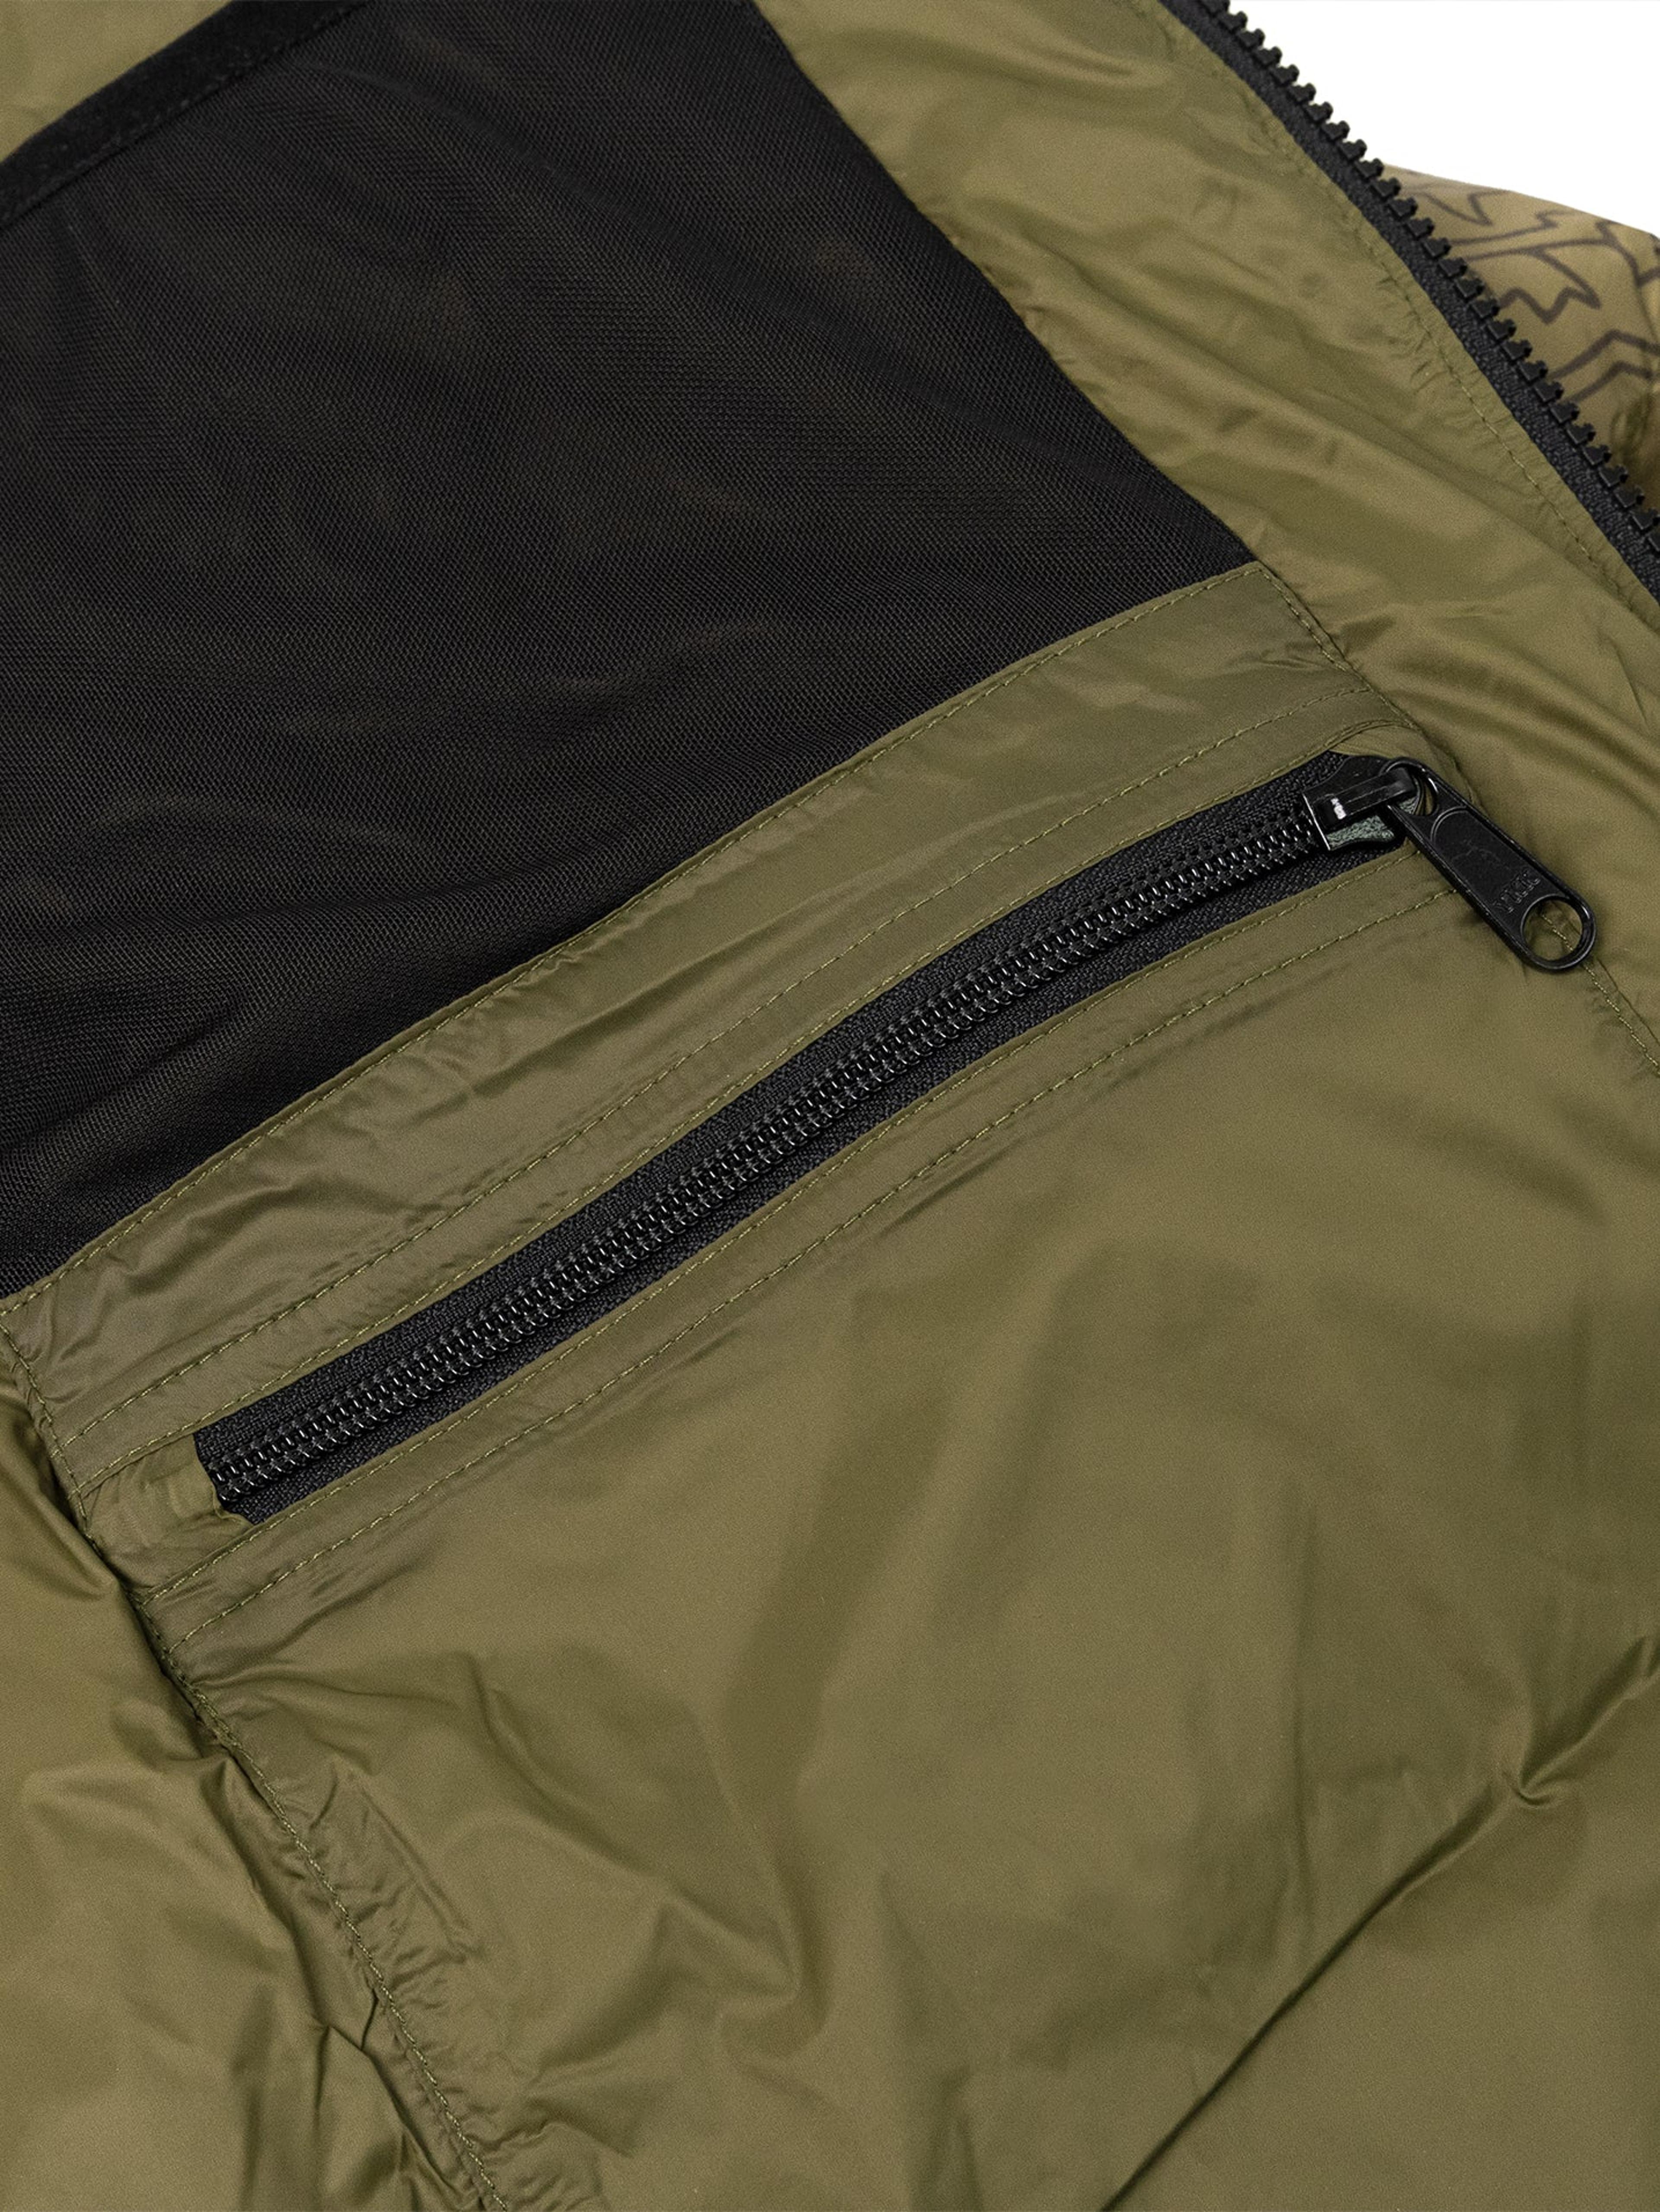 Alternate View 6 of Paisley Butterfly Down Jacket - Olive